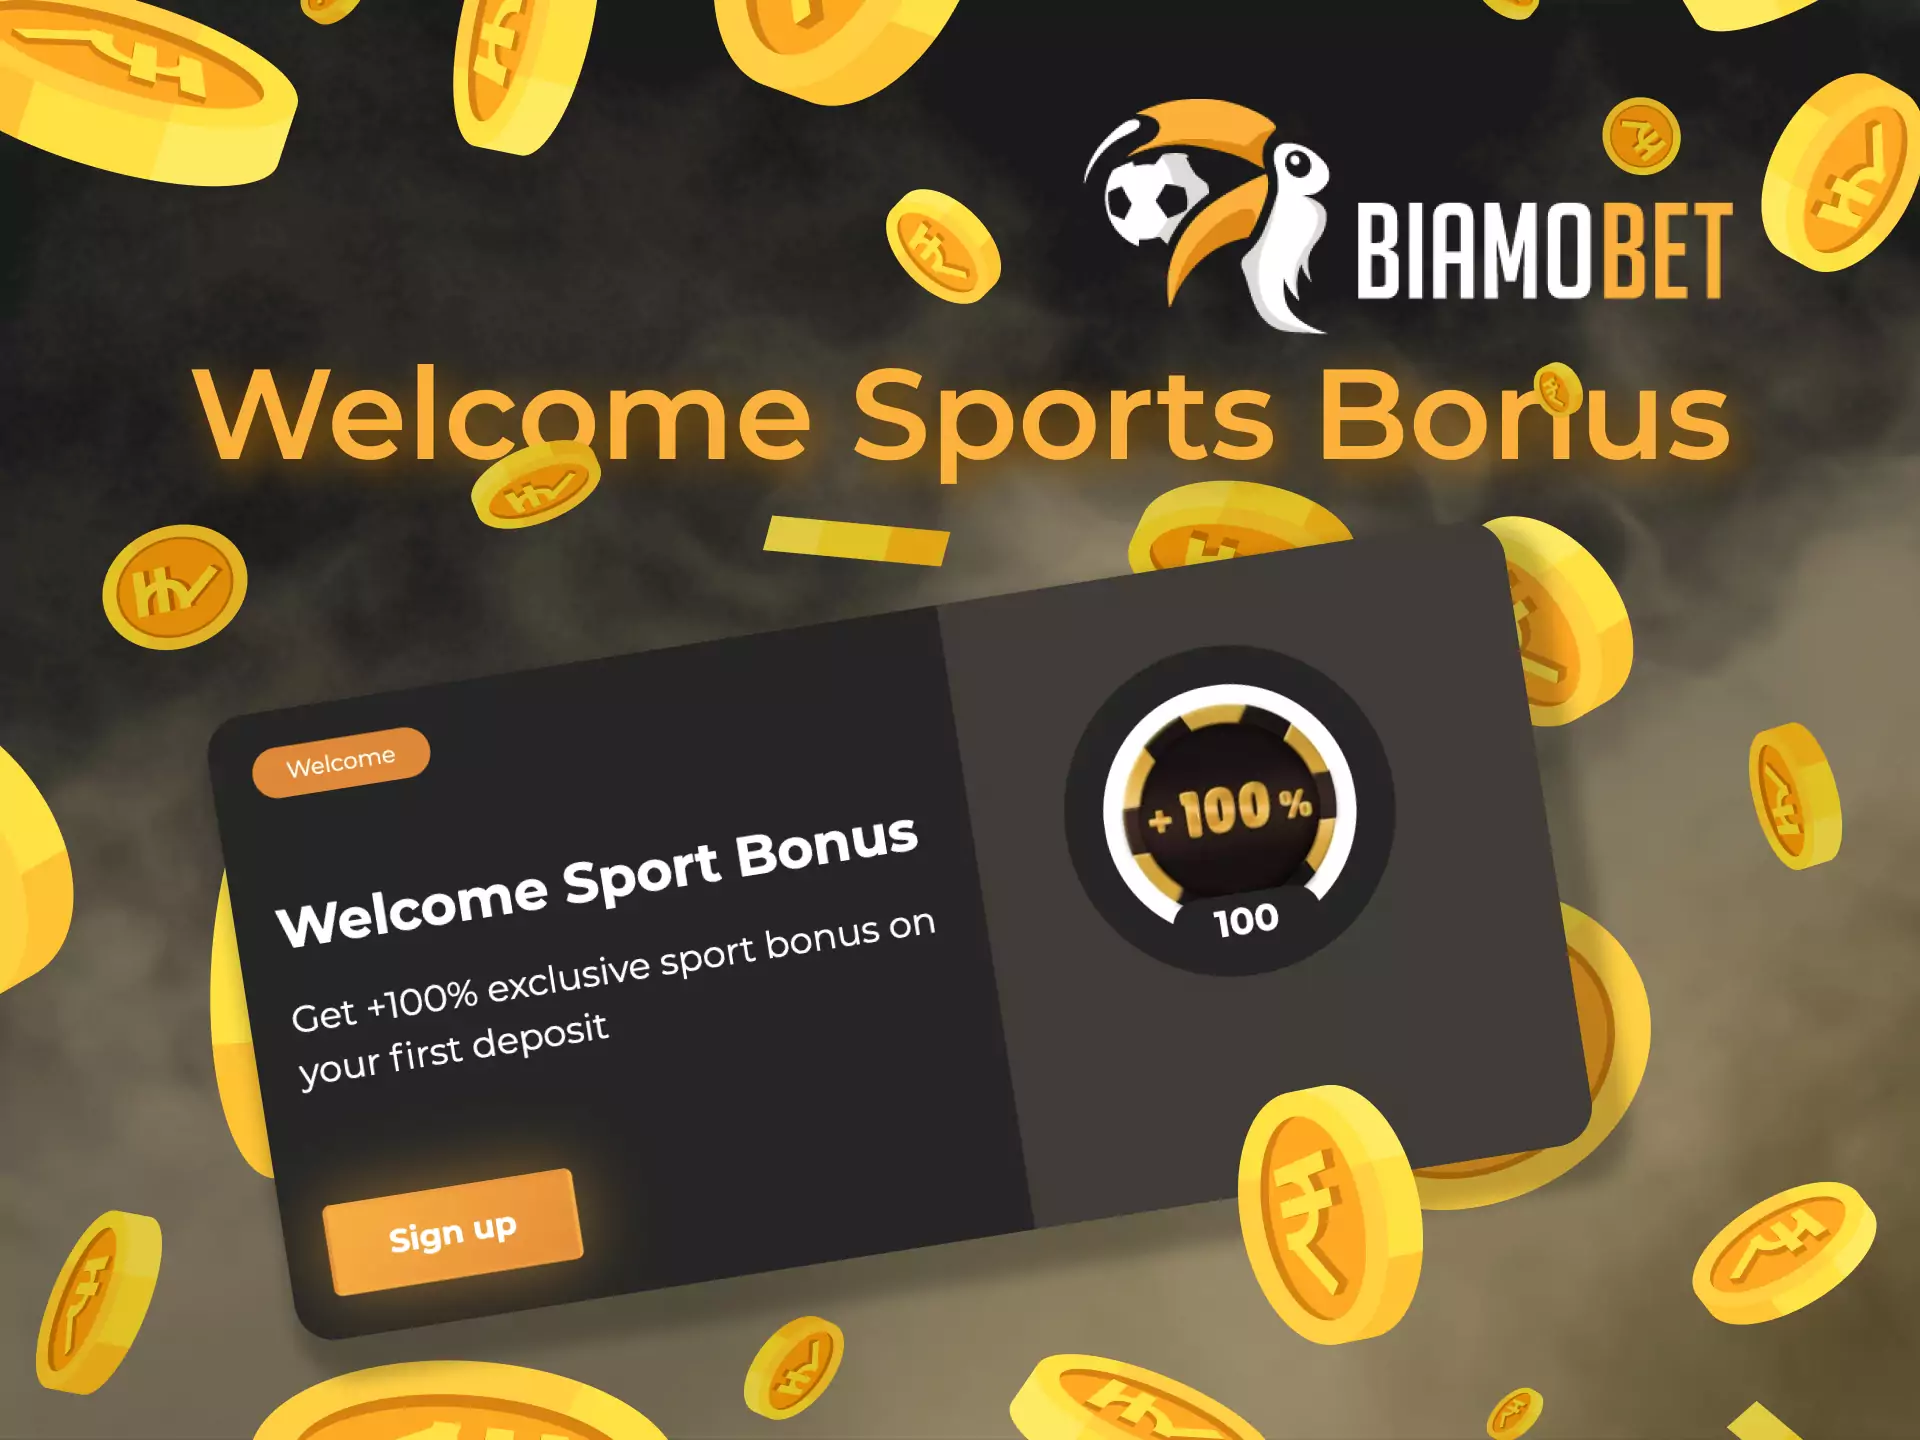 Betting on sports matches, you can get a special Biamobet sports bonus.